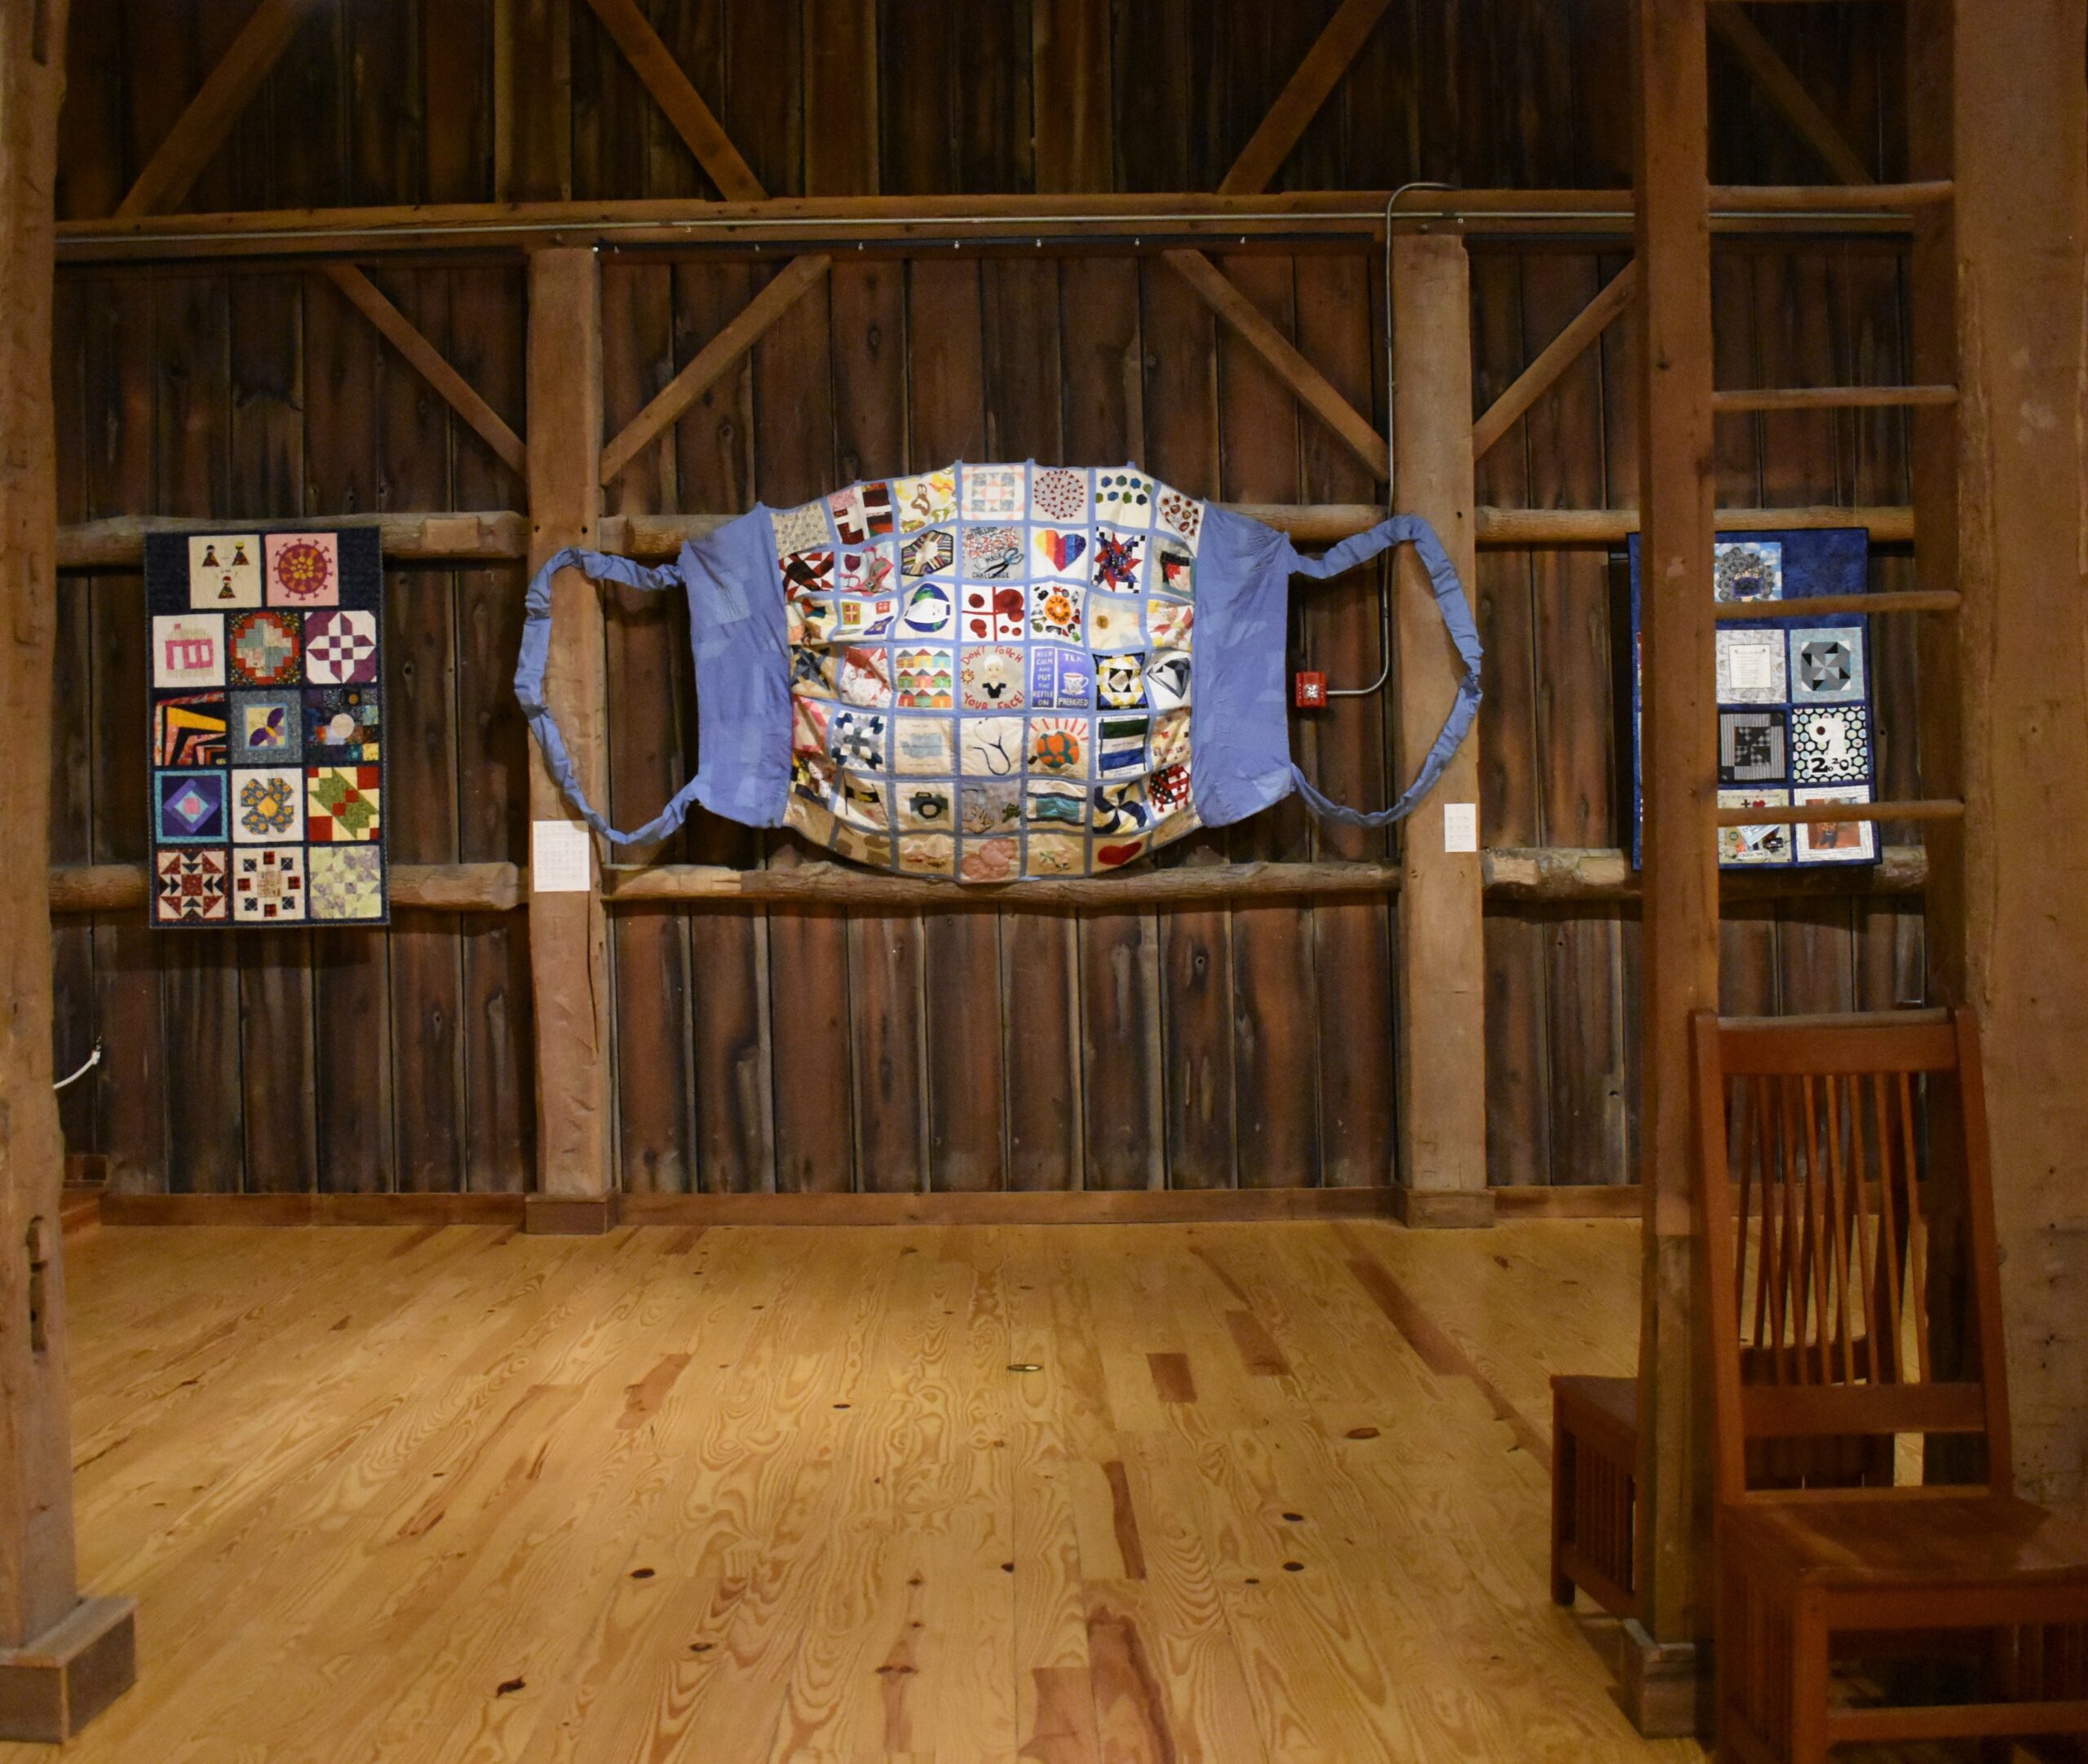 A giant mask created out of fabric squares is displayed on the barn-looking wall.